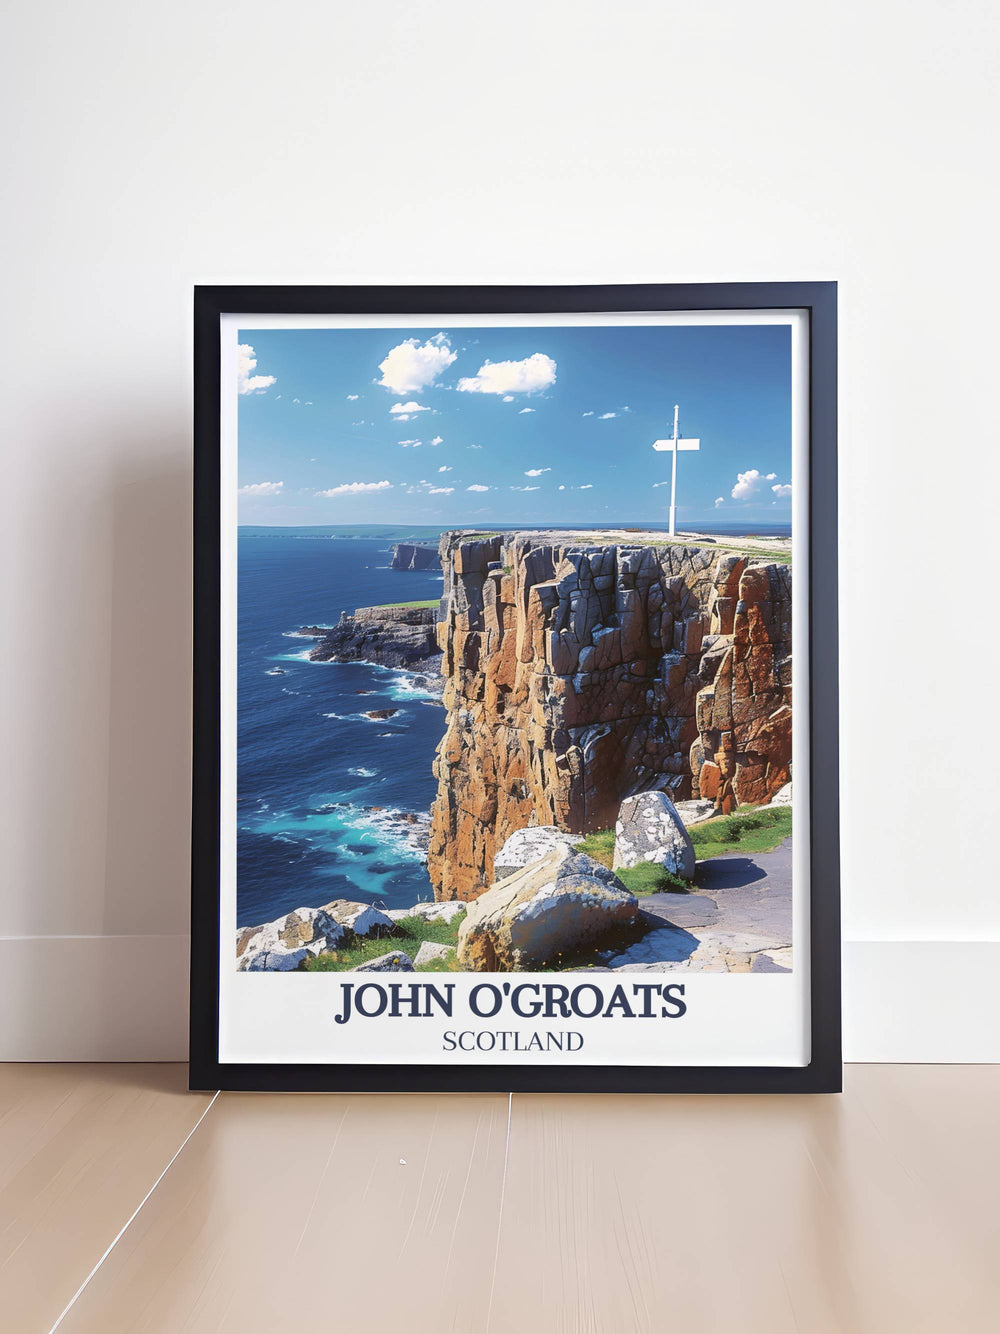 Celebrate your cycling achievements with Lands End Signpost prints. This stunning art captures the spirit of Scotland cycling and the endurance required for the End to End Bike Ride. Ideal for any cyclists home or office space.